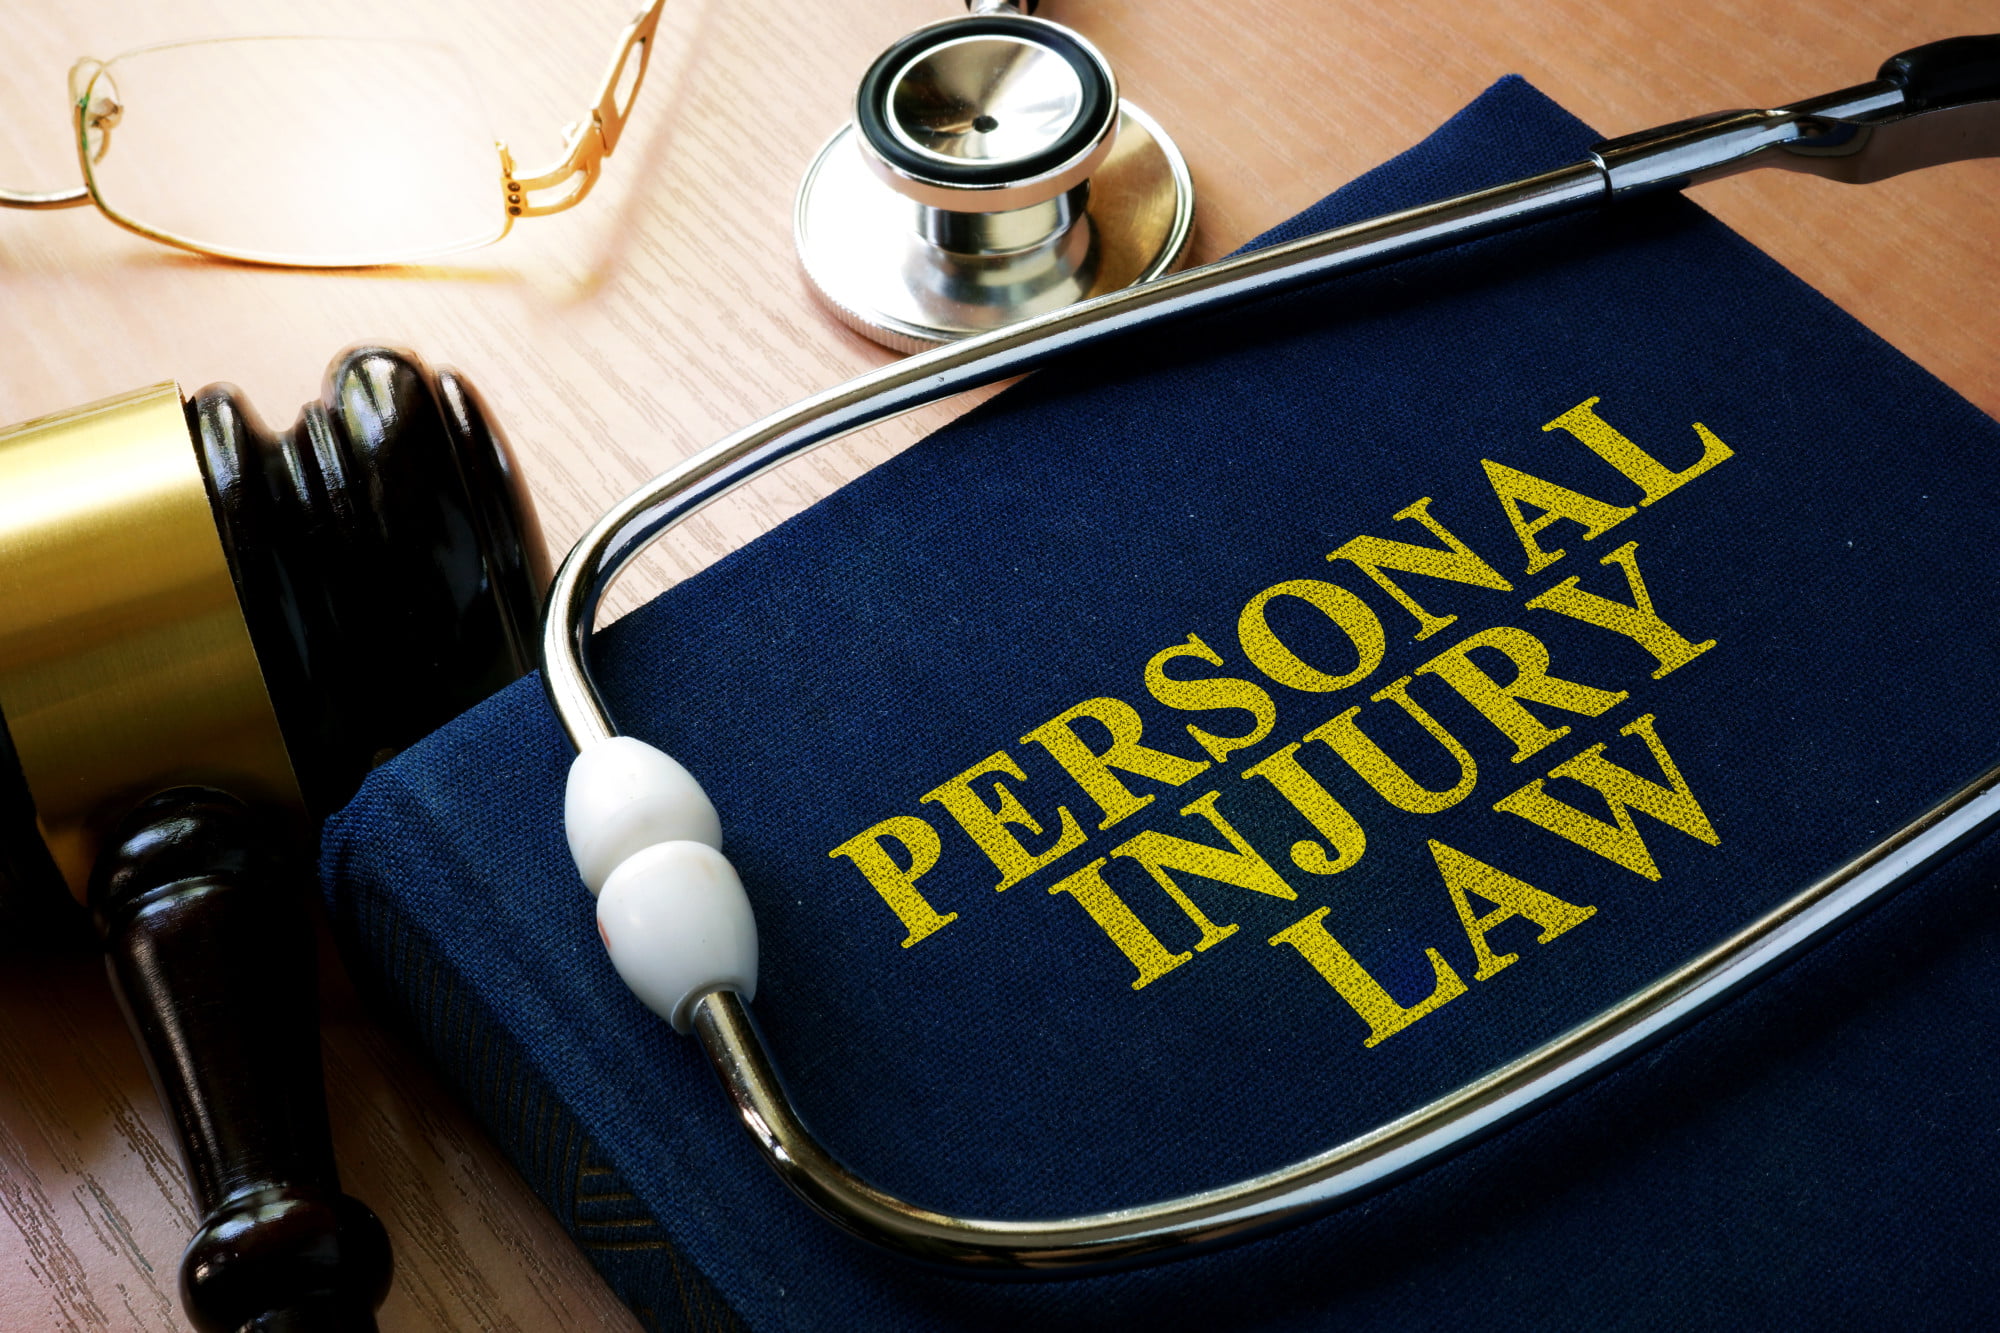 Are you entitled to compensation after suffering an injury? Click here to discover the signs that you have a strong personal injury case.